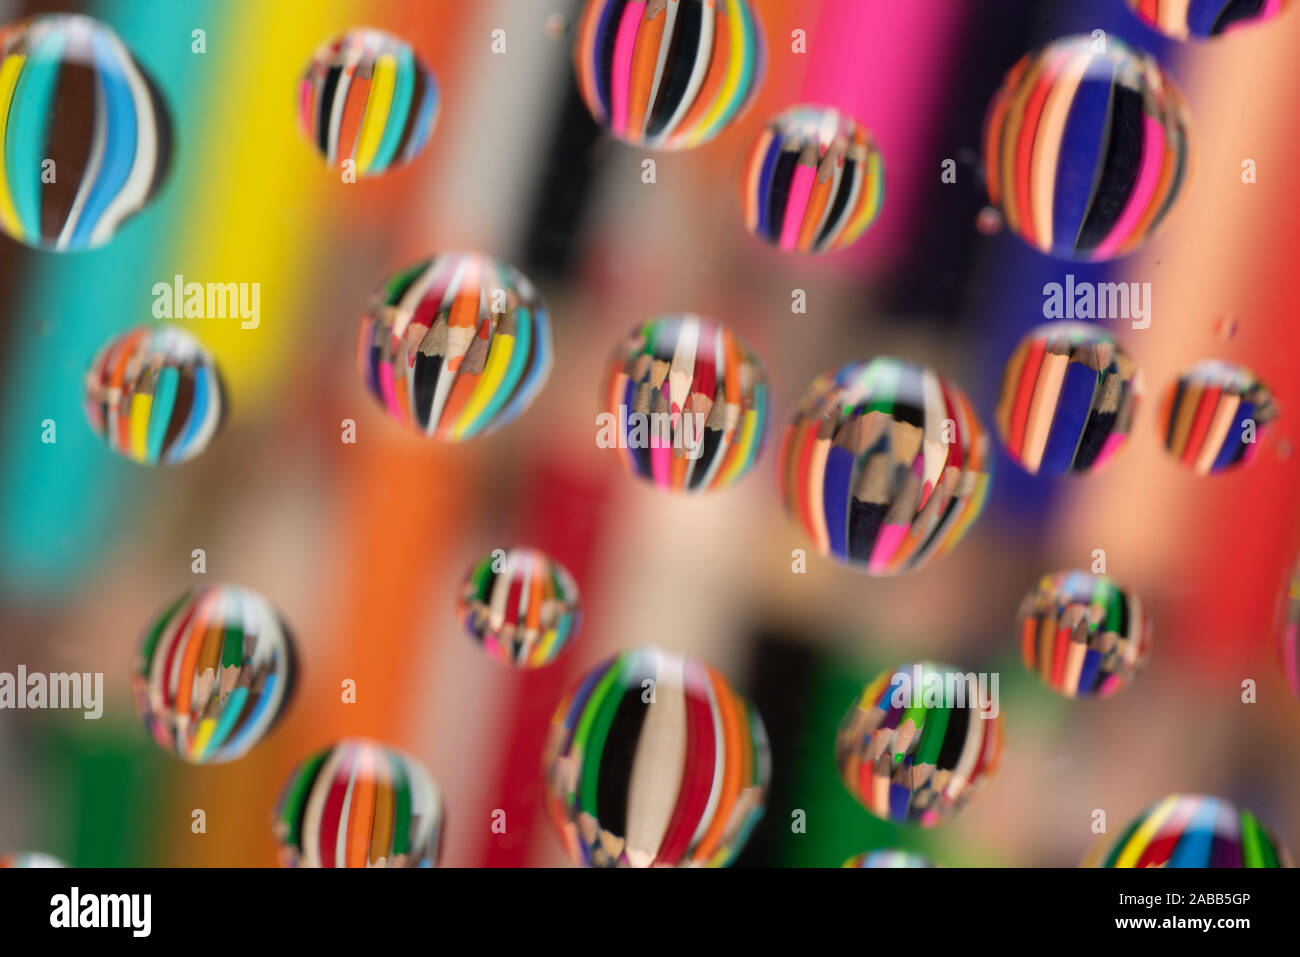 Coloured drawing pencils reflected on waterdrops resting a piece of glass creating a wonderful colourful background. Stock Photo